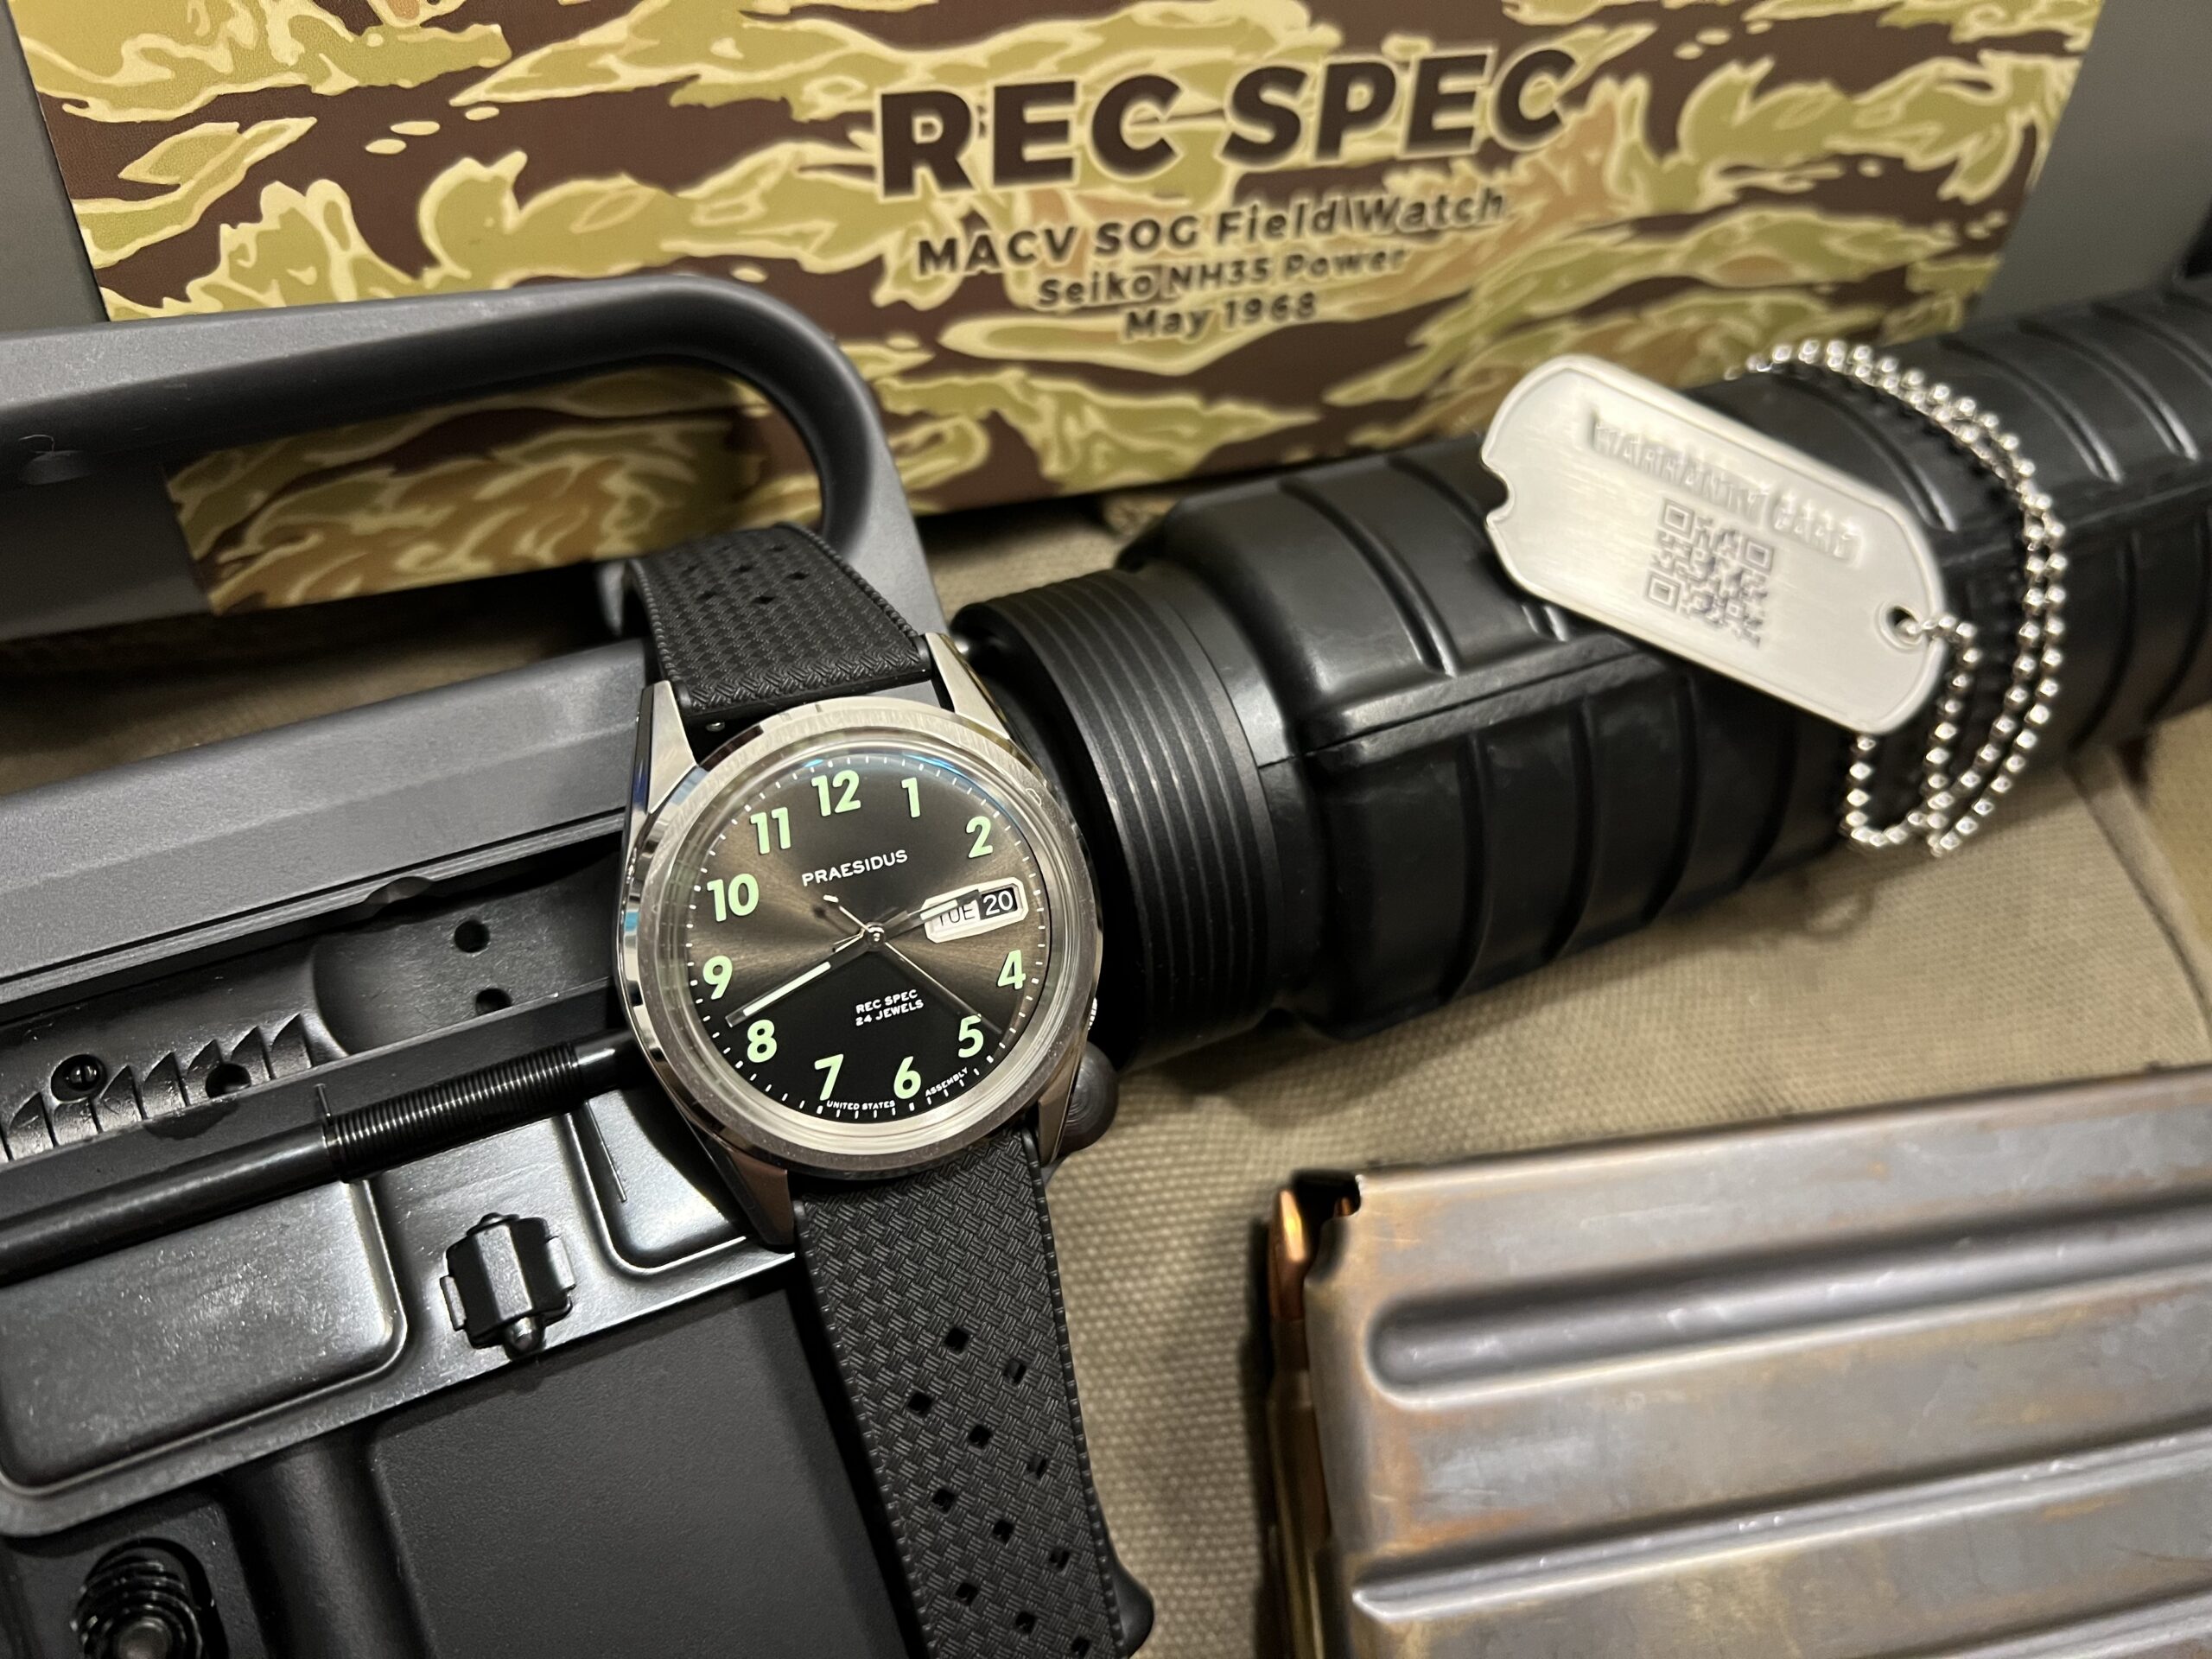 <em>The Rec Spec features a box with MACV-SOG's iconic tiger stripe pattern and a warranty card QR code on a dog tag (WATM/Miguel Ortiz)</em>